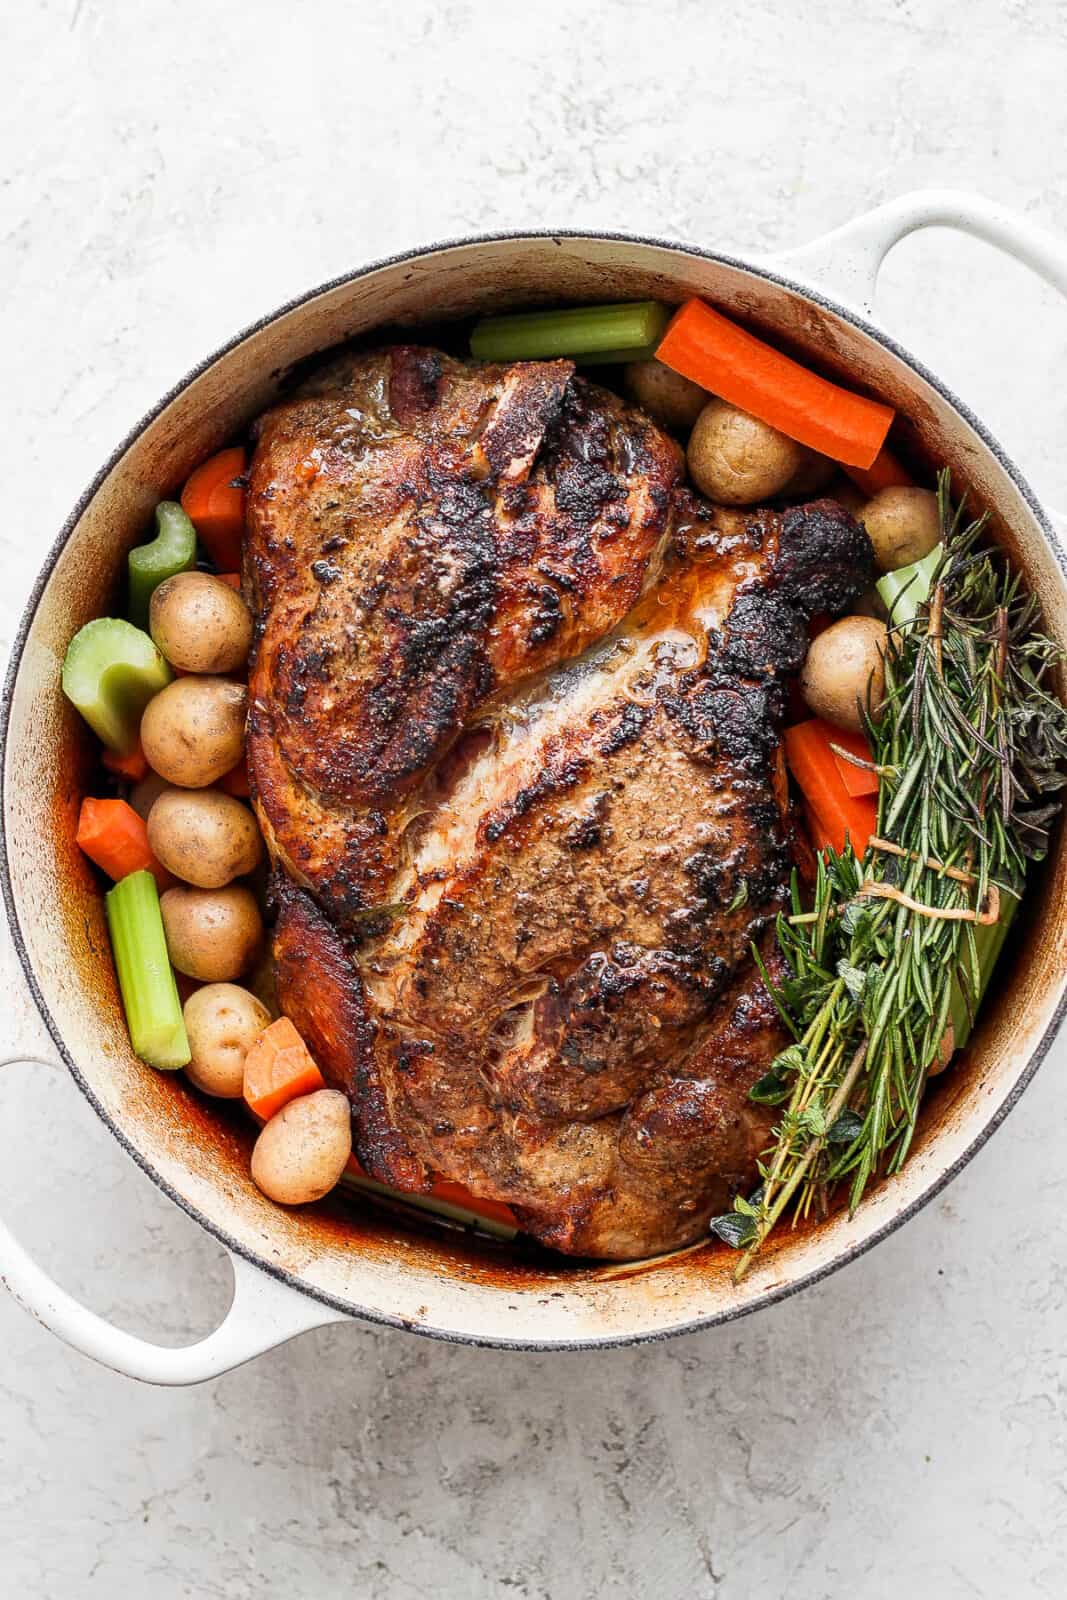 Herb bundle in a dutch oven with a pork roast and vegetables.